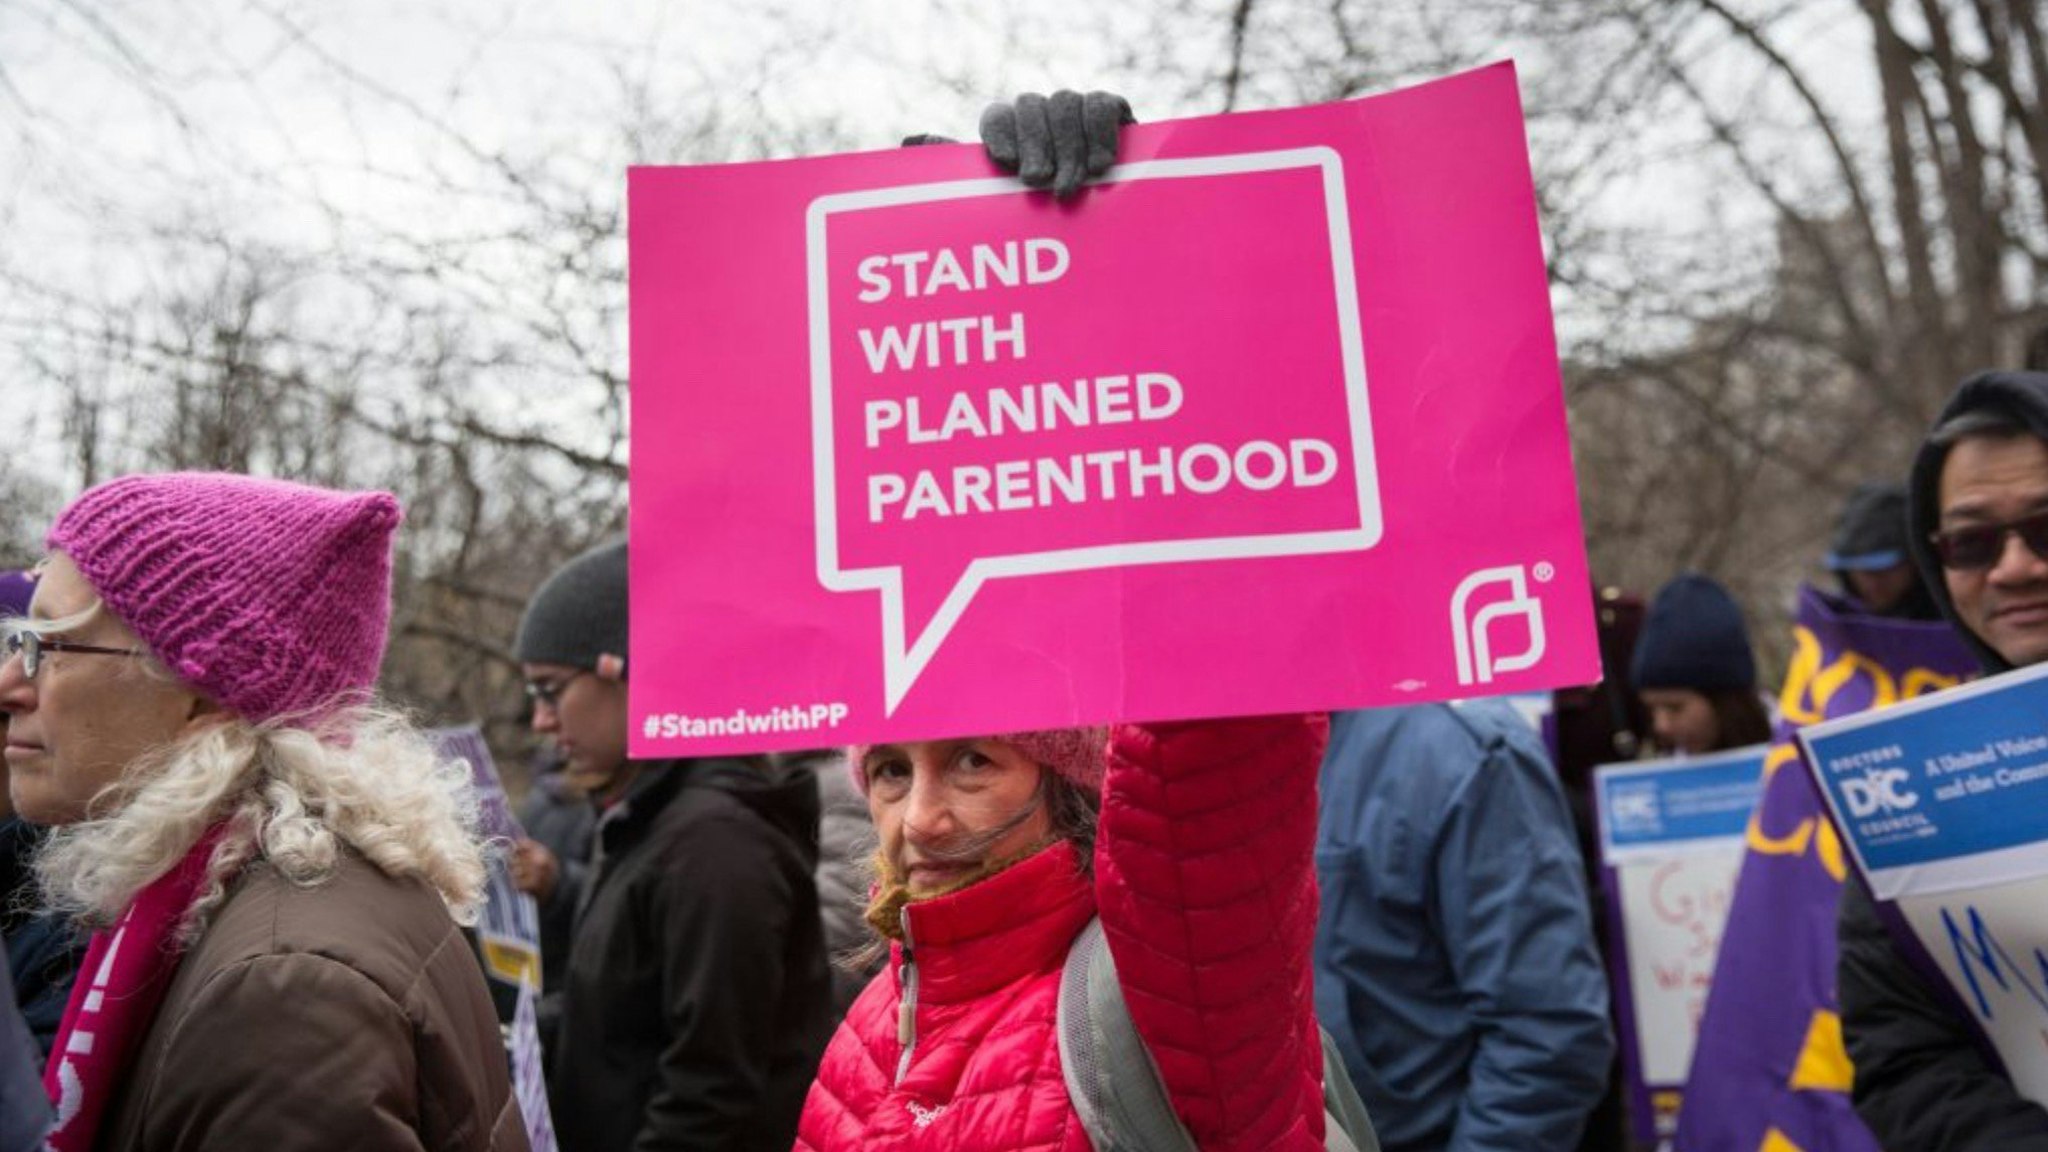 A health care activist lifts signage promoting Planned Parenthood during a rally as part of the national "March for Health" movement in front of Trump Tower on April 1, 2017 in New York City.